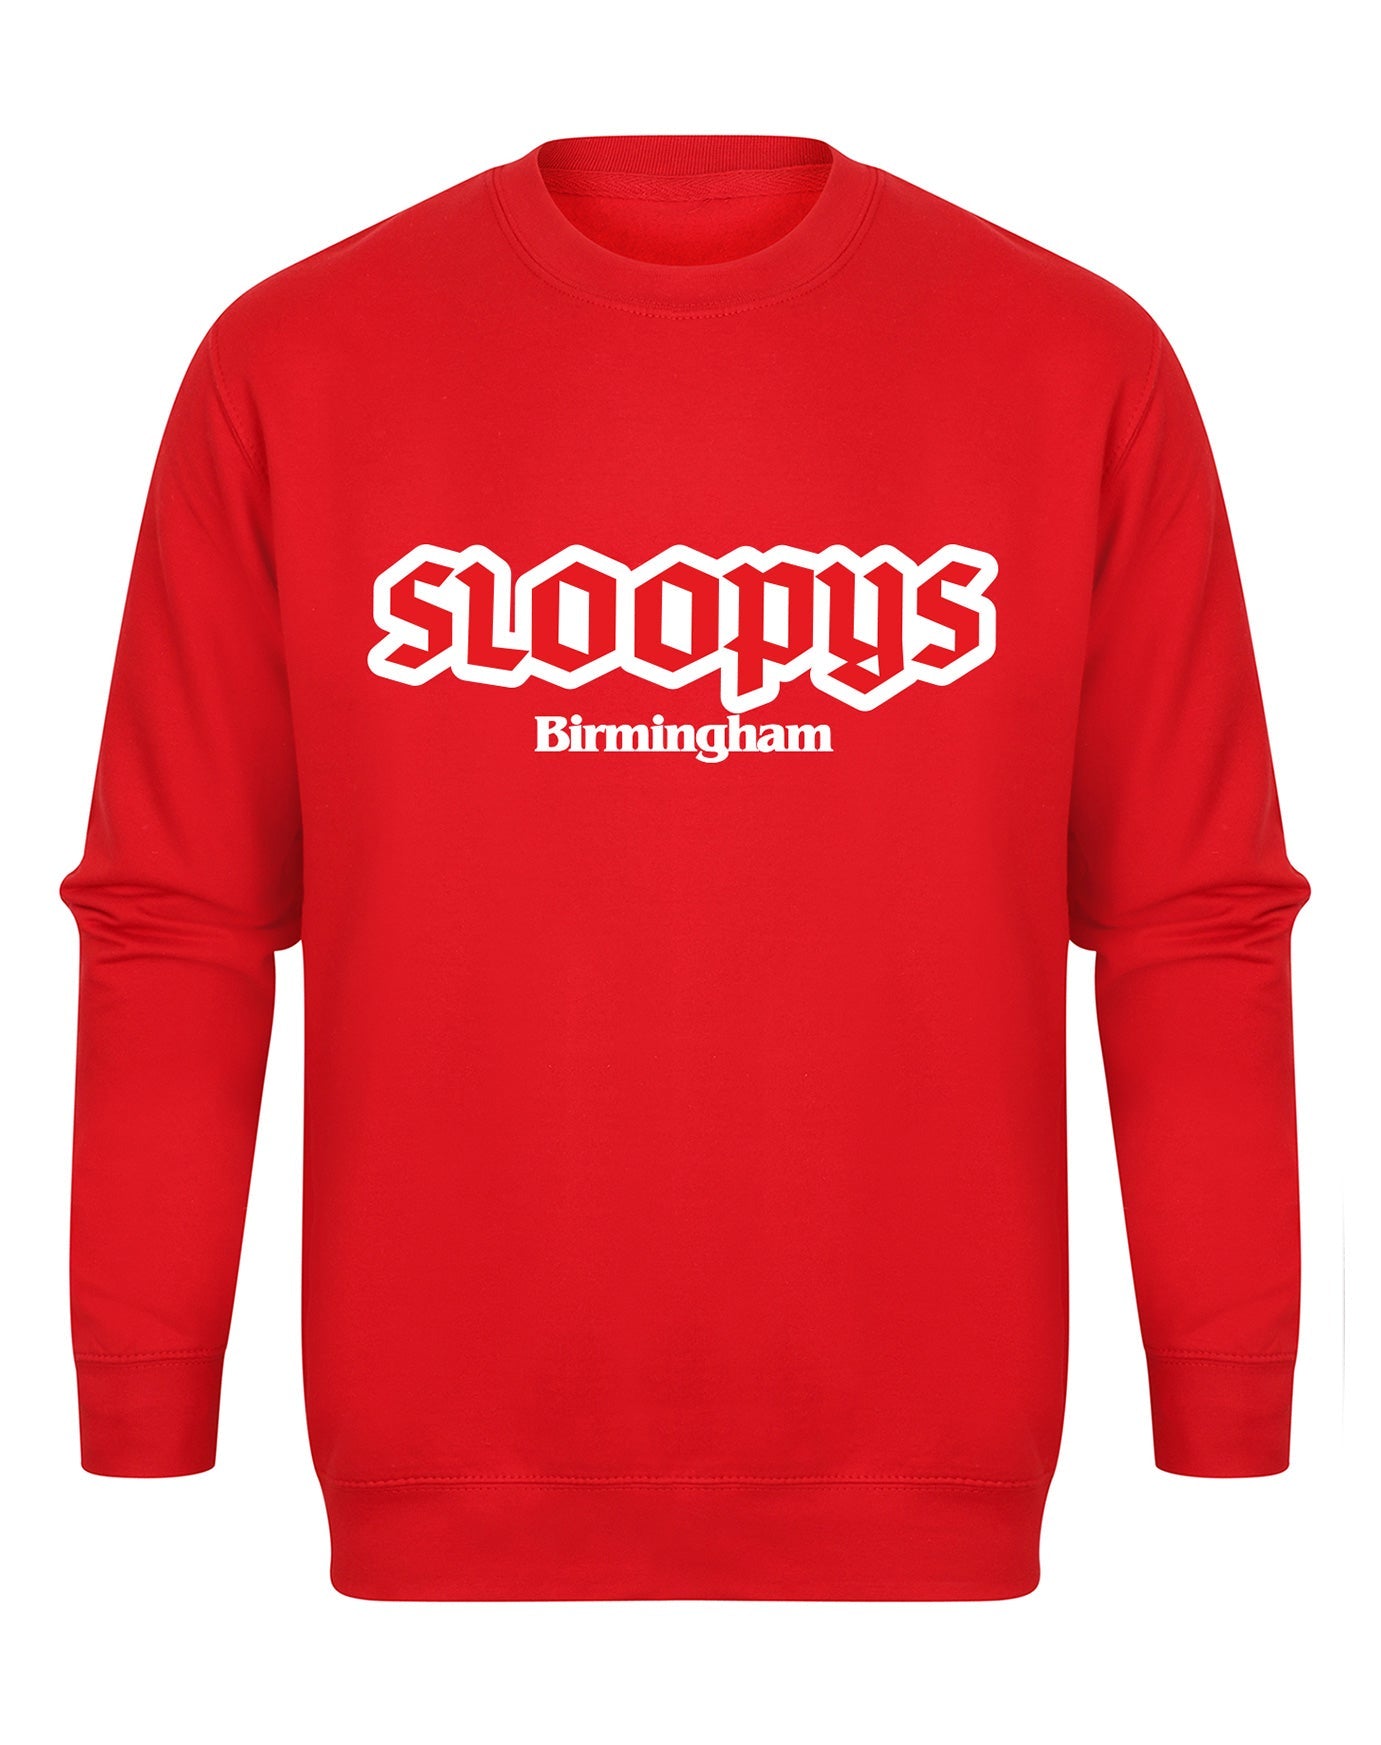 Sloopys unisex fit sweatshirt - various colours - Dirty Stop Outs